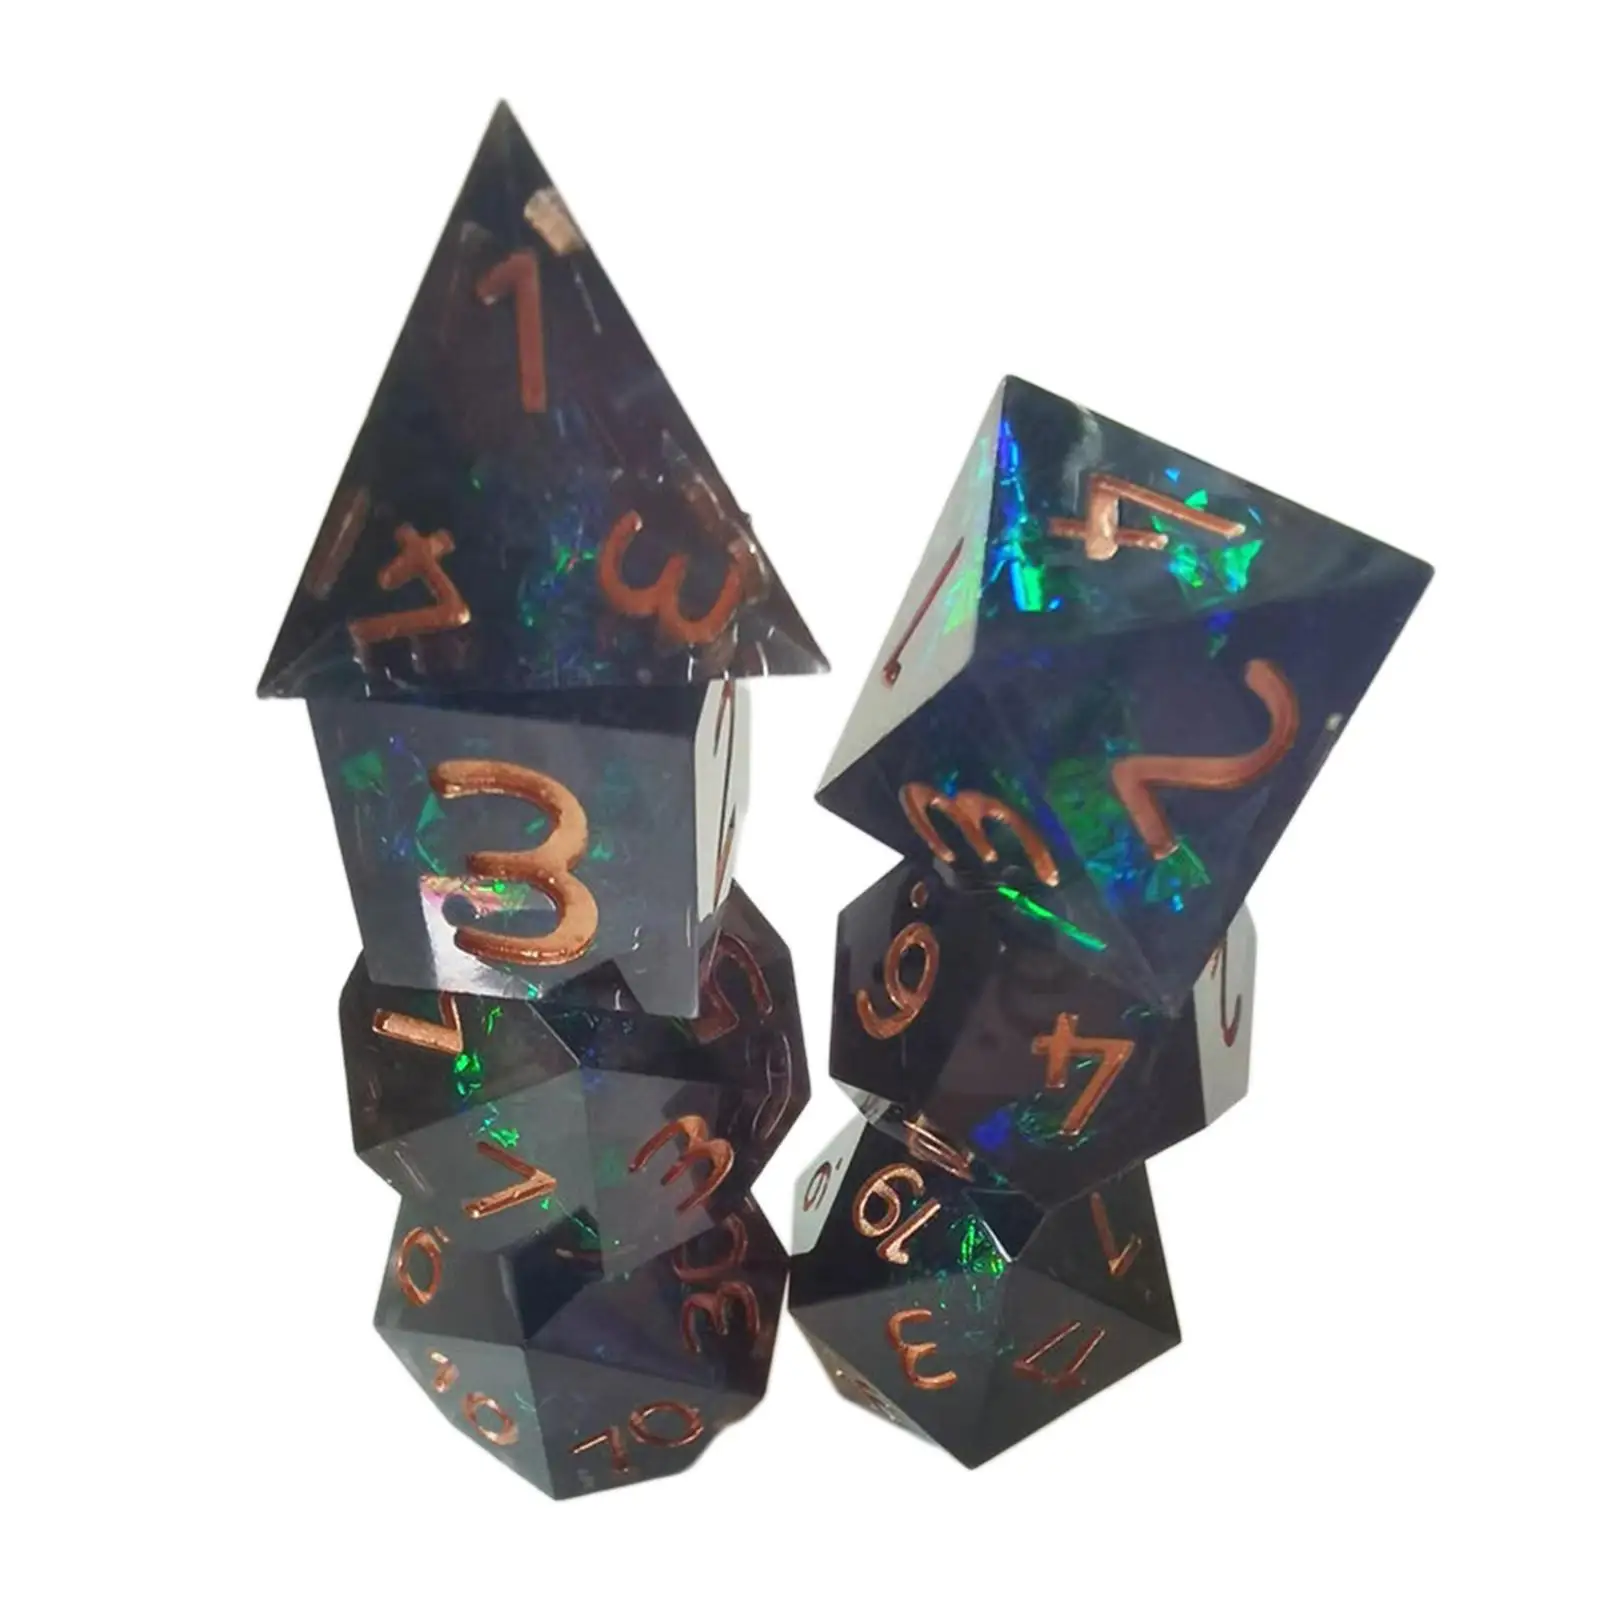 7 Pieces Polyhedral Dices Set D8 D10 D12 D20 Party Toys for DND RPG Table Games Math Teaching